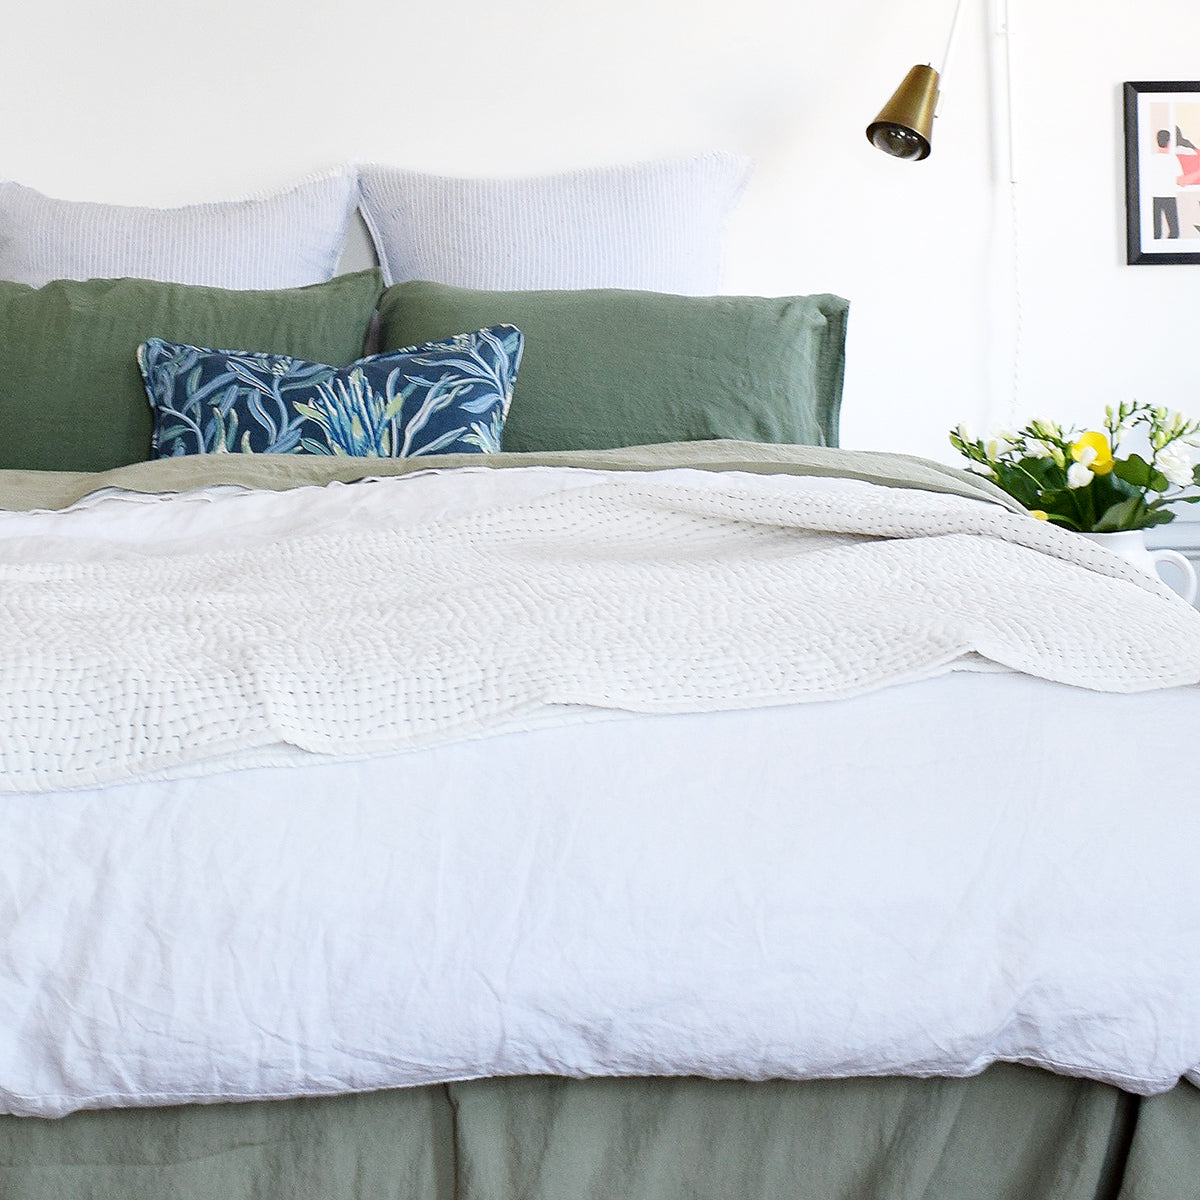 Linge Particulier Jade Green Standard Linen Pillowcase Sham with a white linen duvet and blue Utopia Goods pillow for a colorful linen bedding look in camo green - Collyer's Mansion